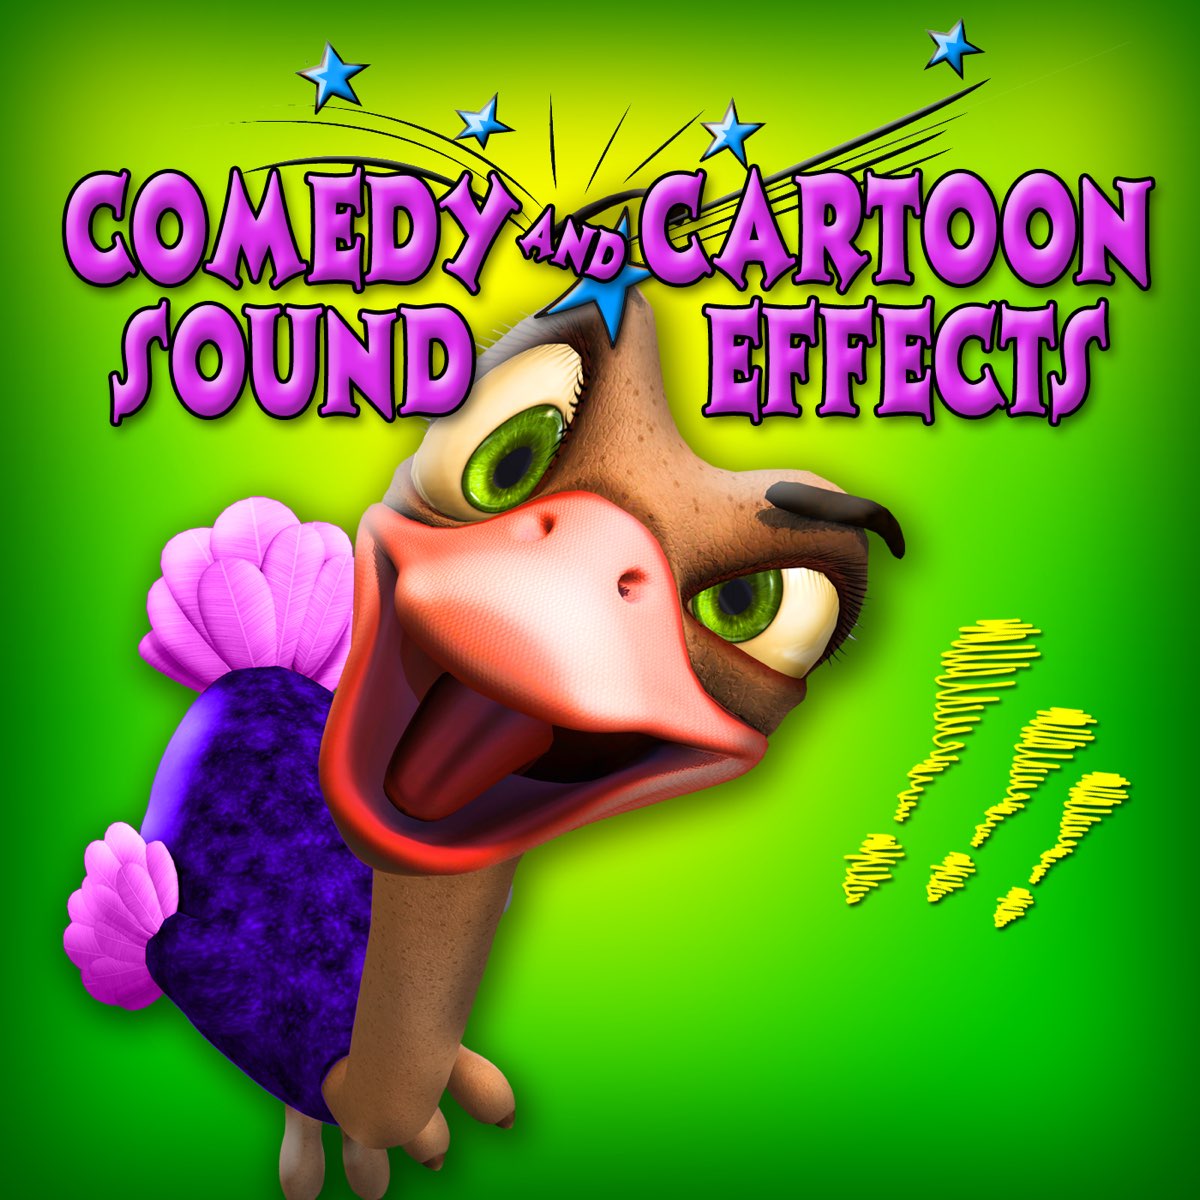 Comedy and Cartoon Sound Effects by Dr. Sound FX on Apple Music